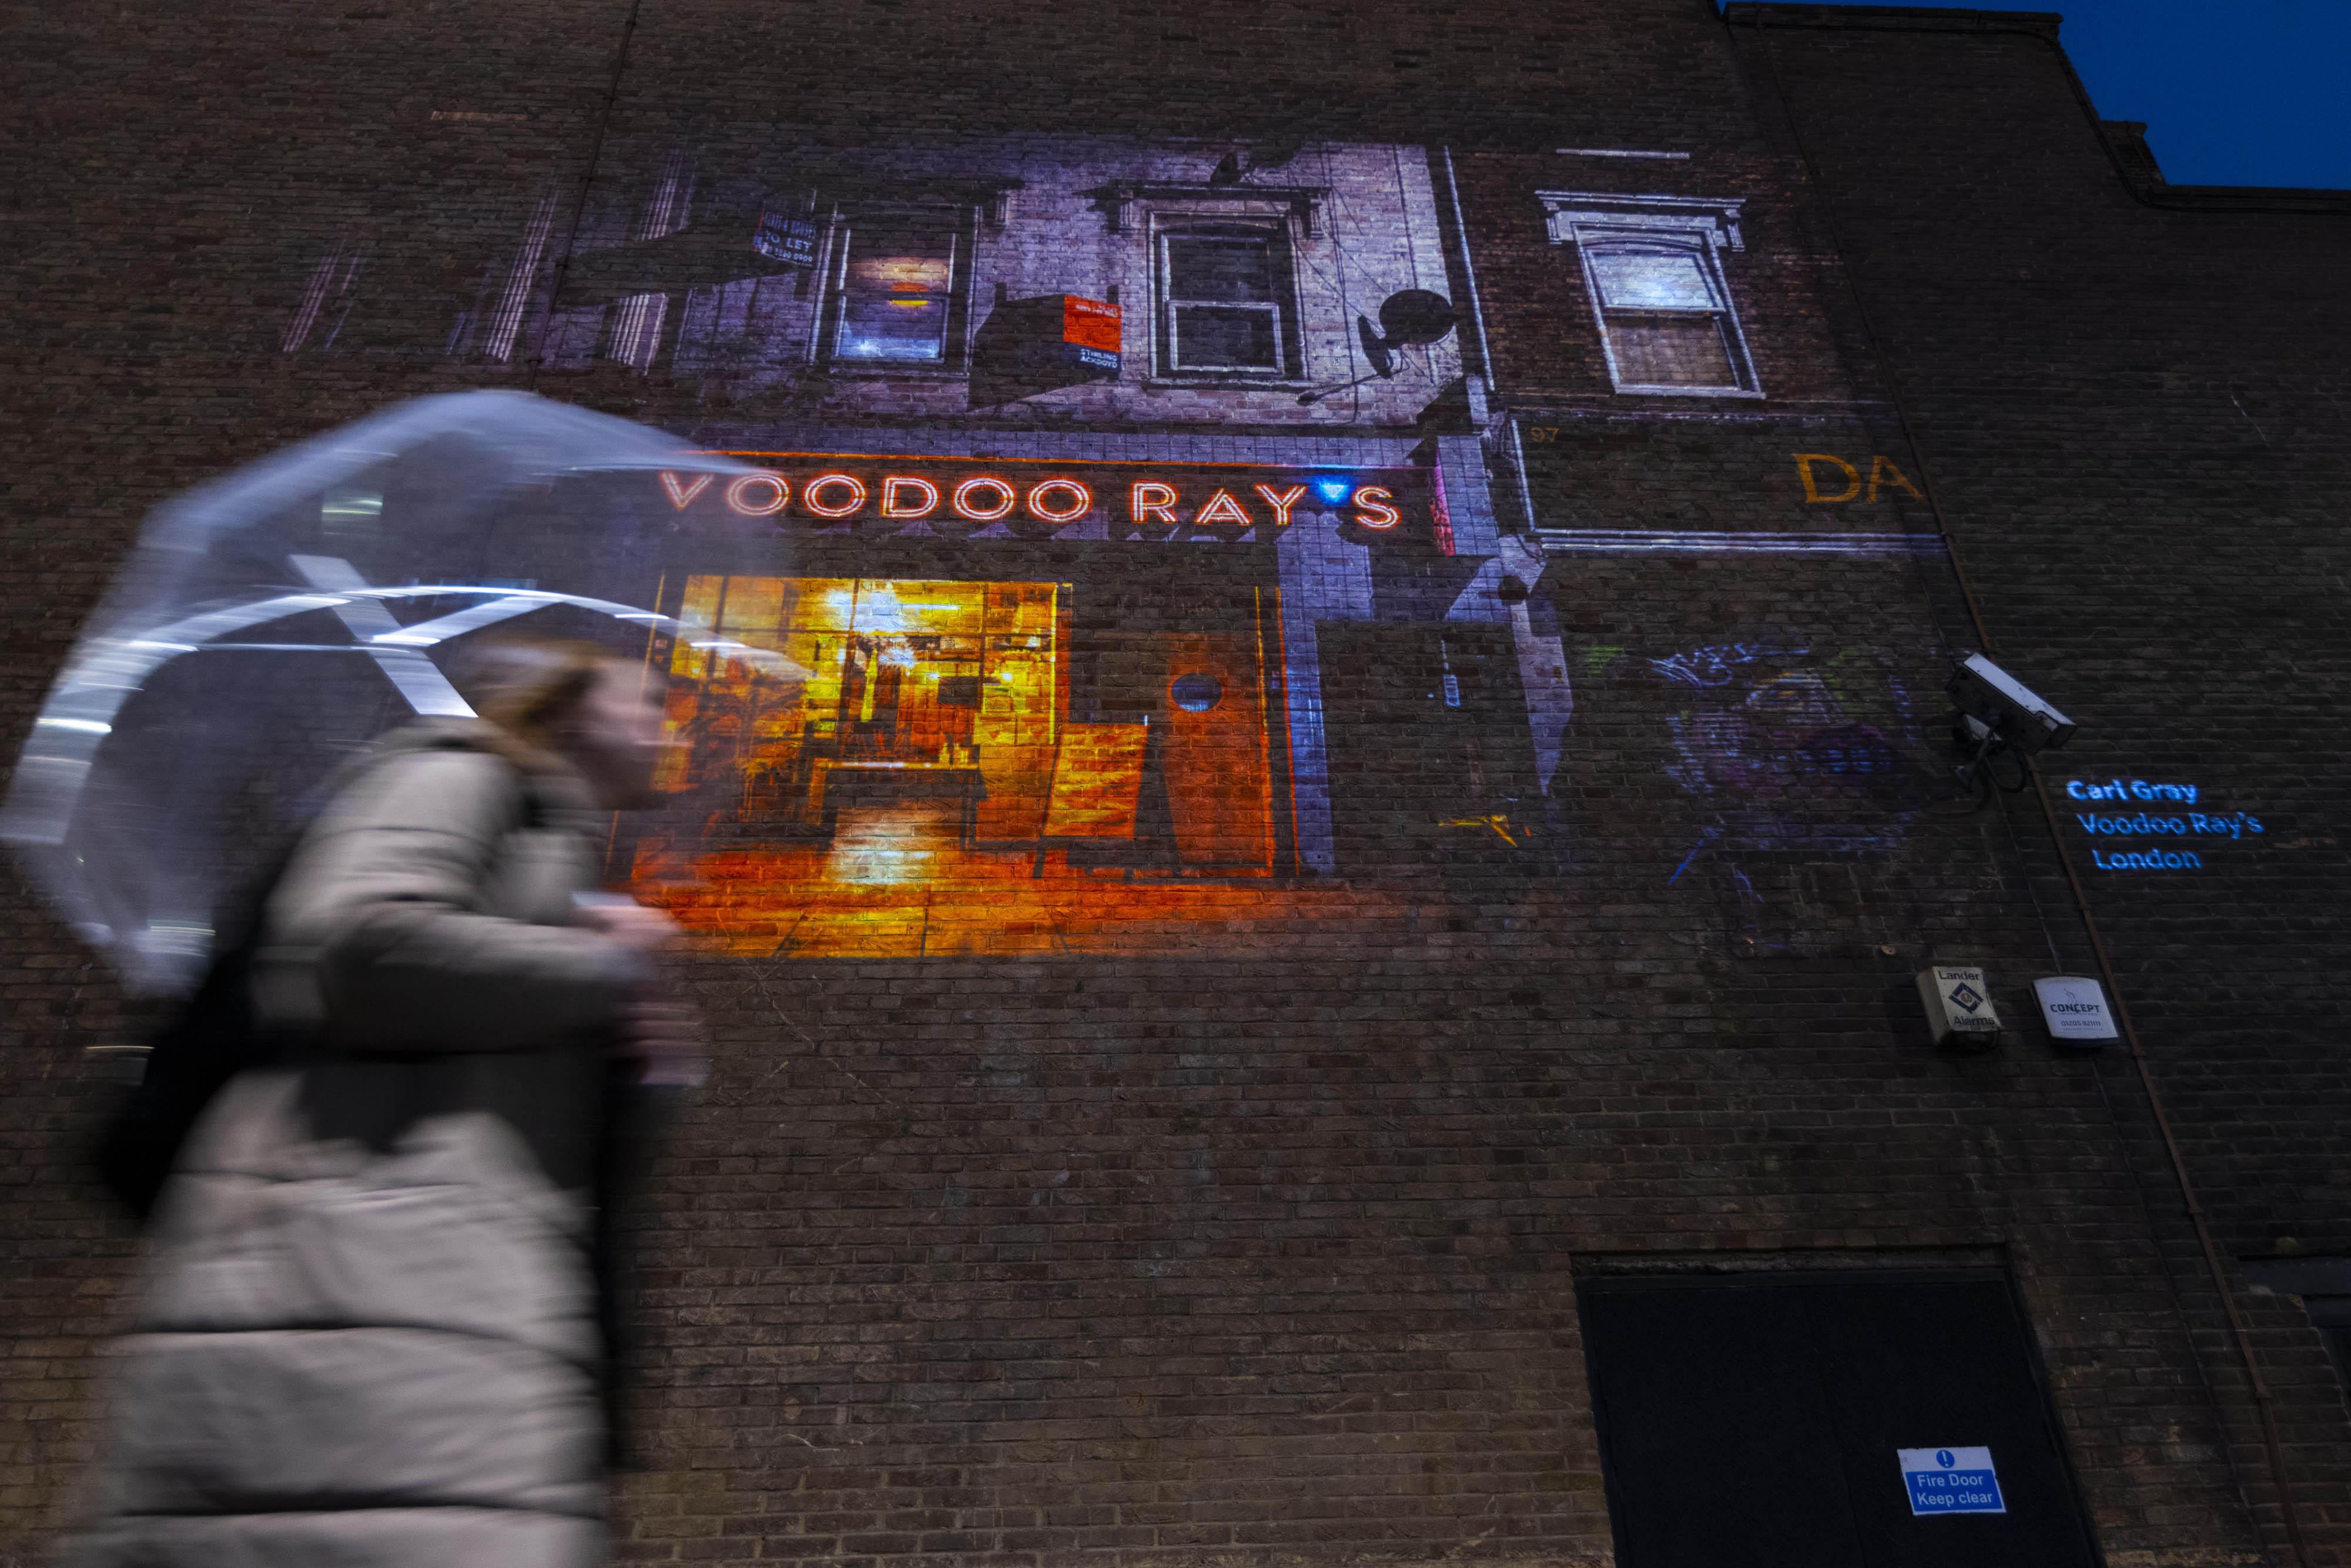 A photo by Carl Gray from Historic England’s ‘Picturing High Streets’ outdoor exhibition is projected outside The Photographers’ Gallery in London. A woman holding an umbrella is walking by.